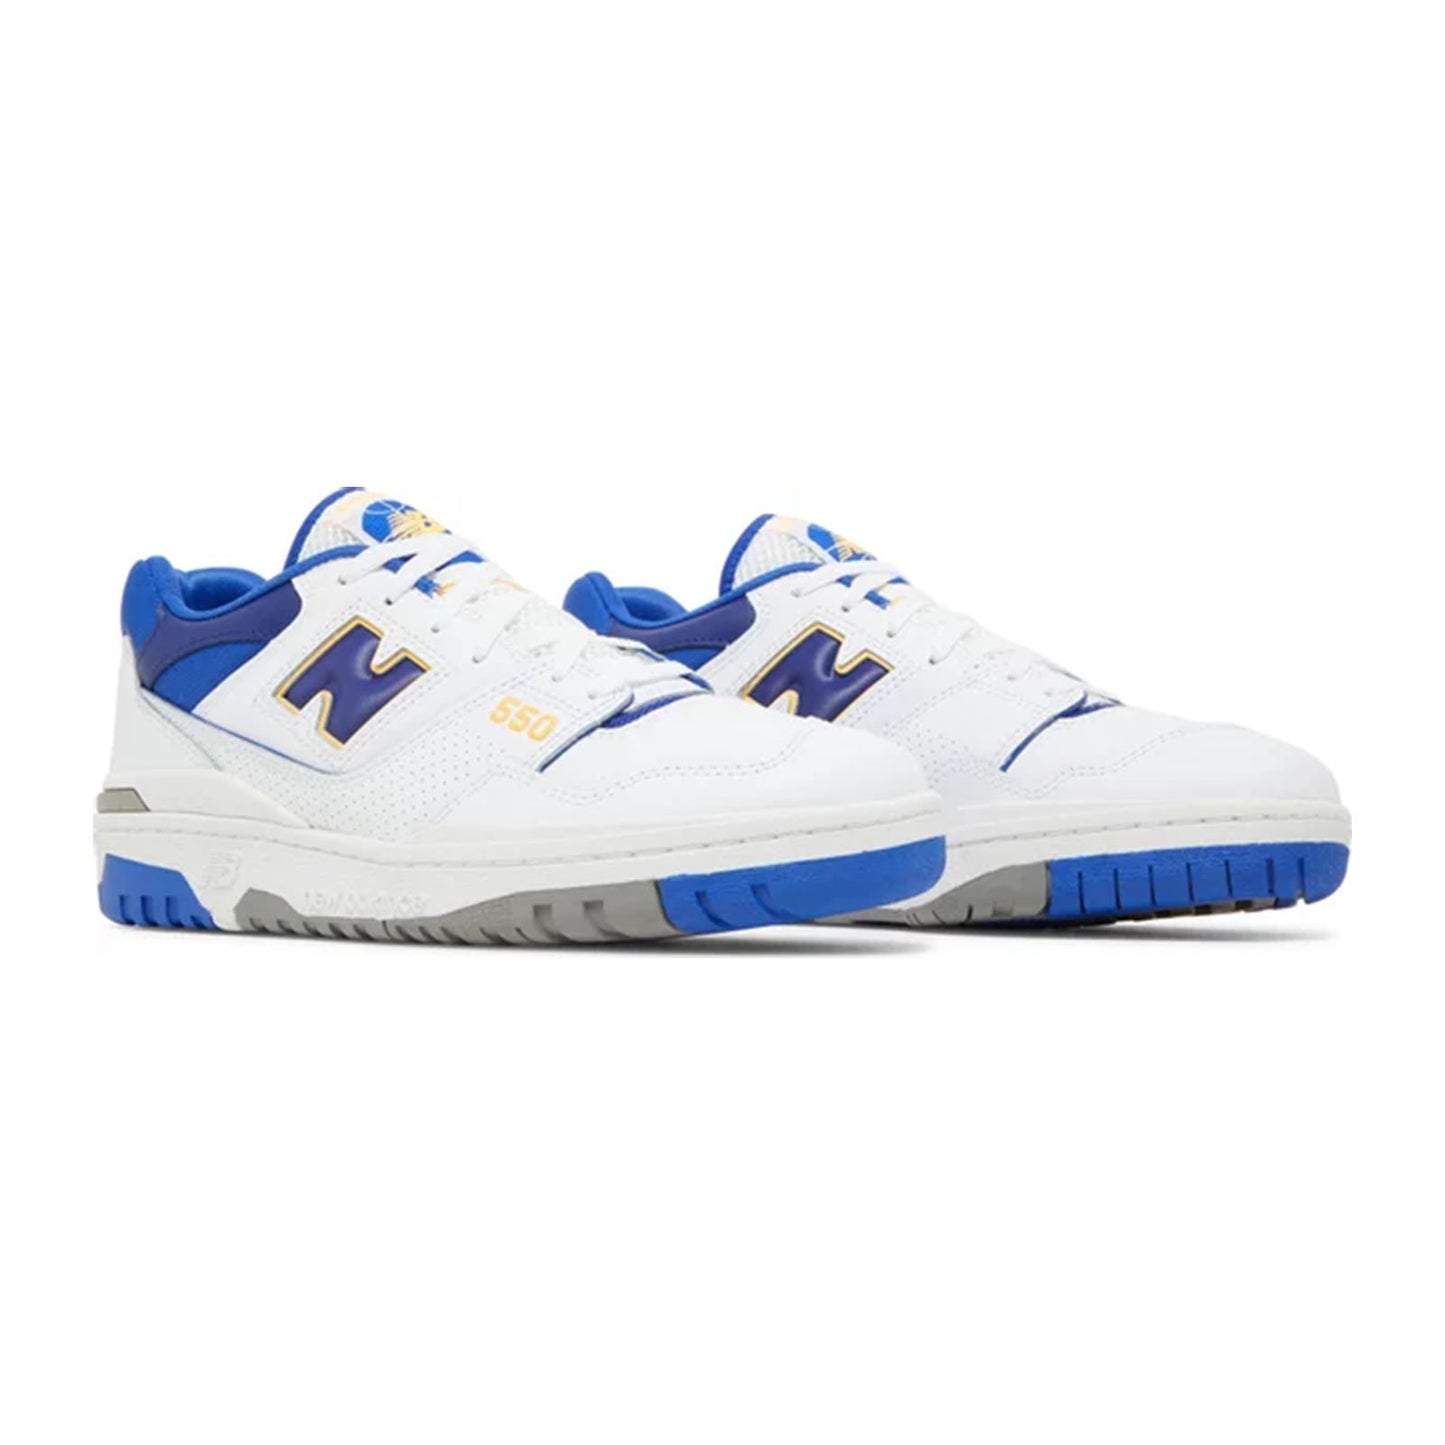 New Balance 550, Lakers Pack-Infinity Blue